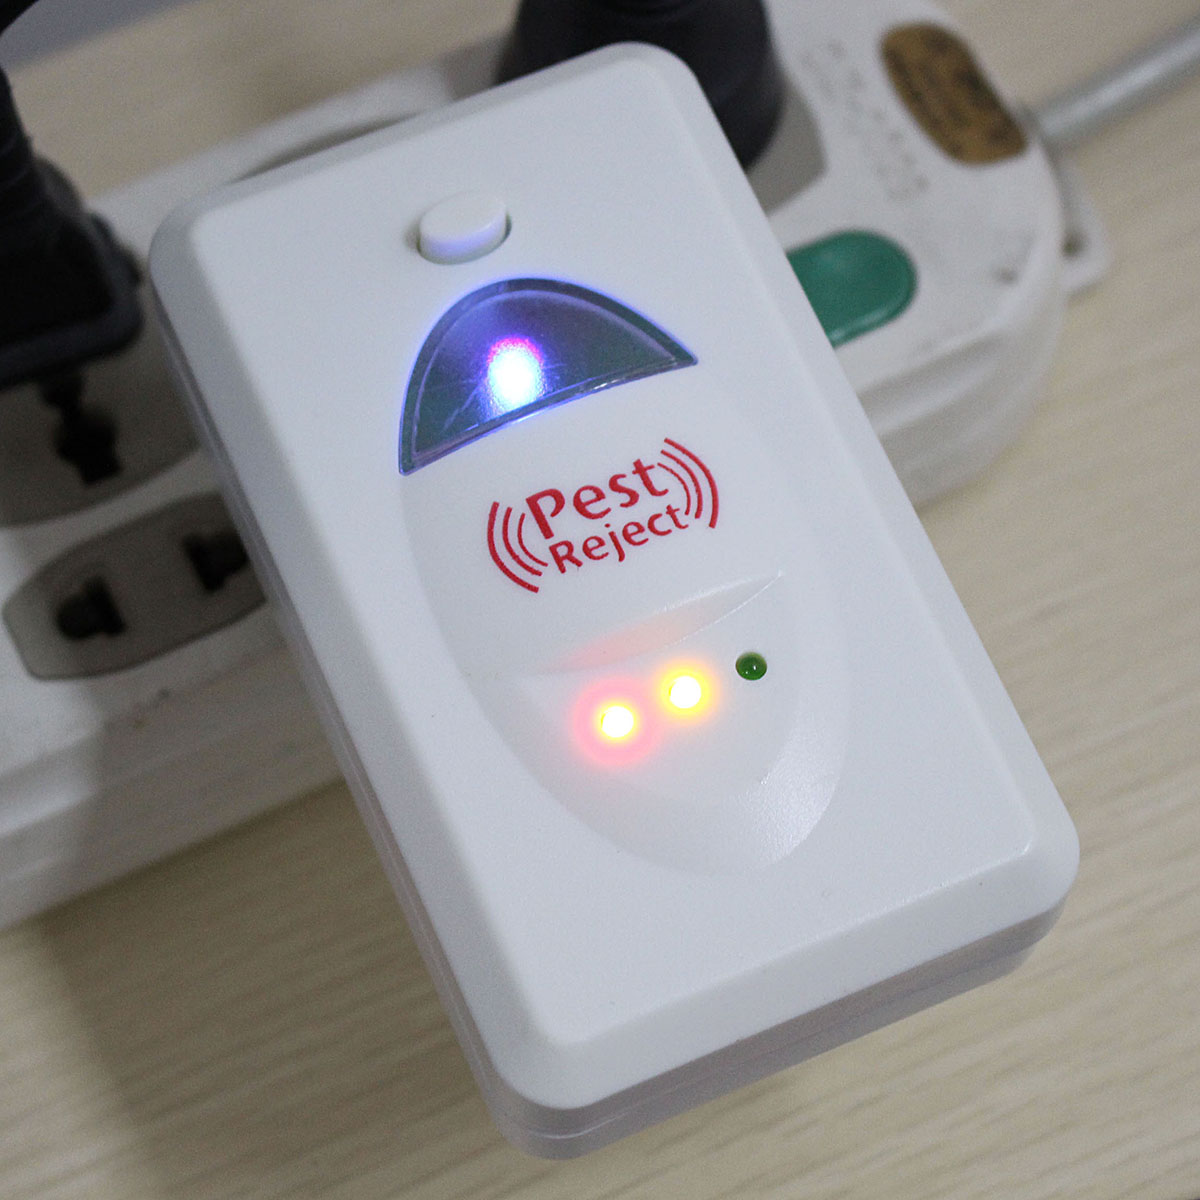 110V-Ultrasonic-Electronic-Pest-Dispeller-Reject-Anti-Mosquito-Bug-Insect-Enhanced-PVC-1612001-10